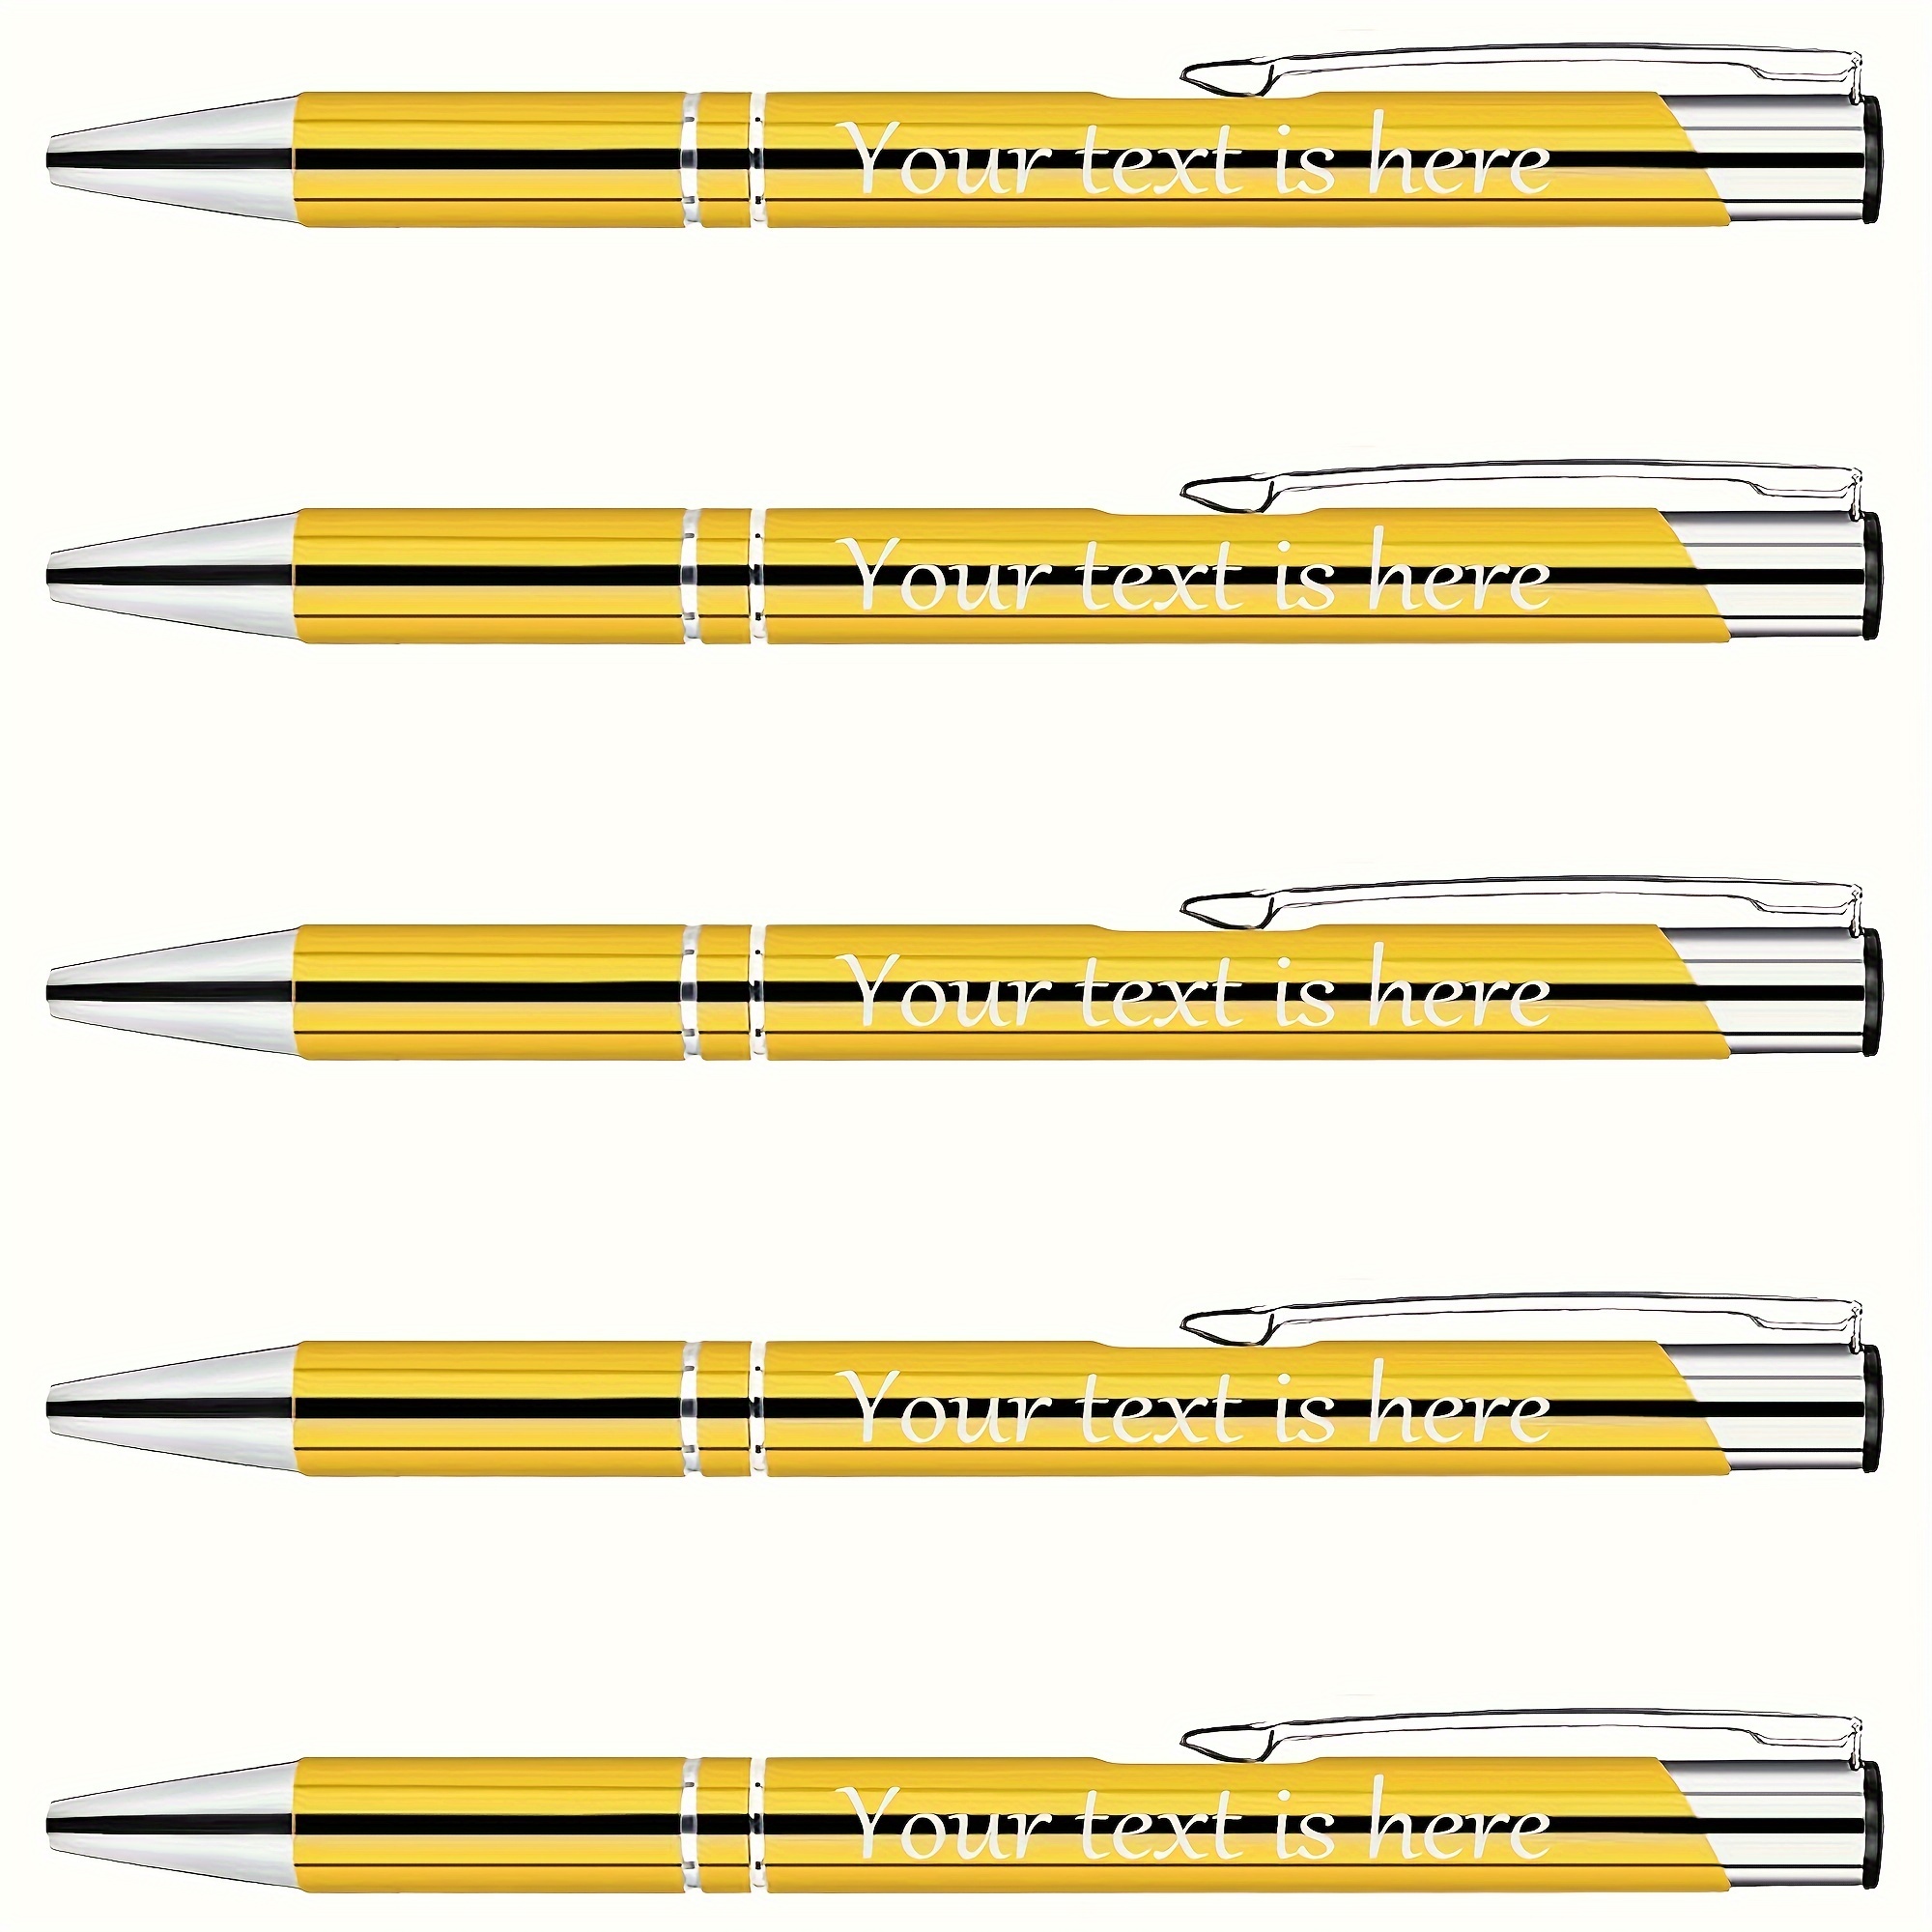 

Custom Engraved Metal Pens, 5-piece - Personalized Touch Screen Stylus, Ideal For Gifts & Business - Light Yellow With Your Name, Perfect For Birthdays, Anniversaries, Graduations